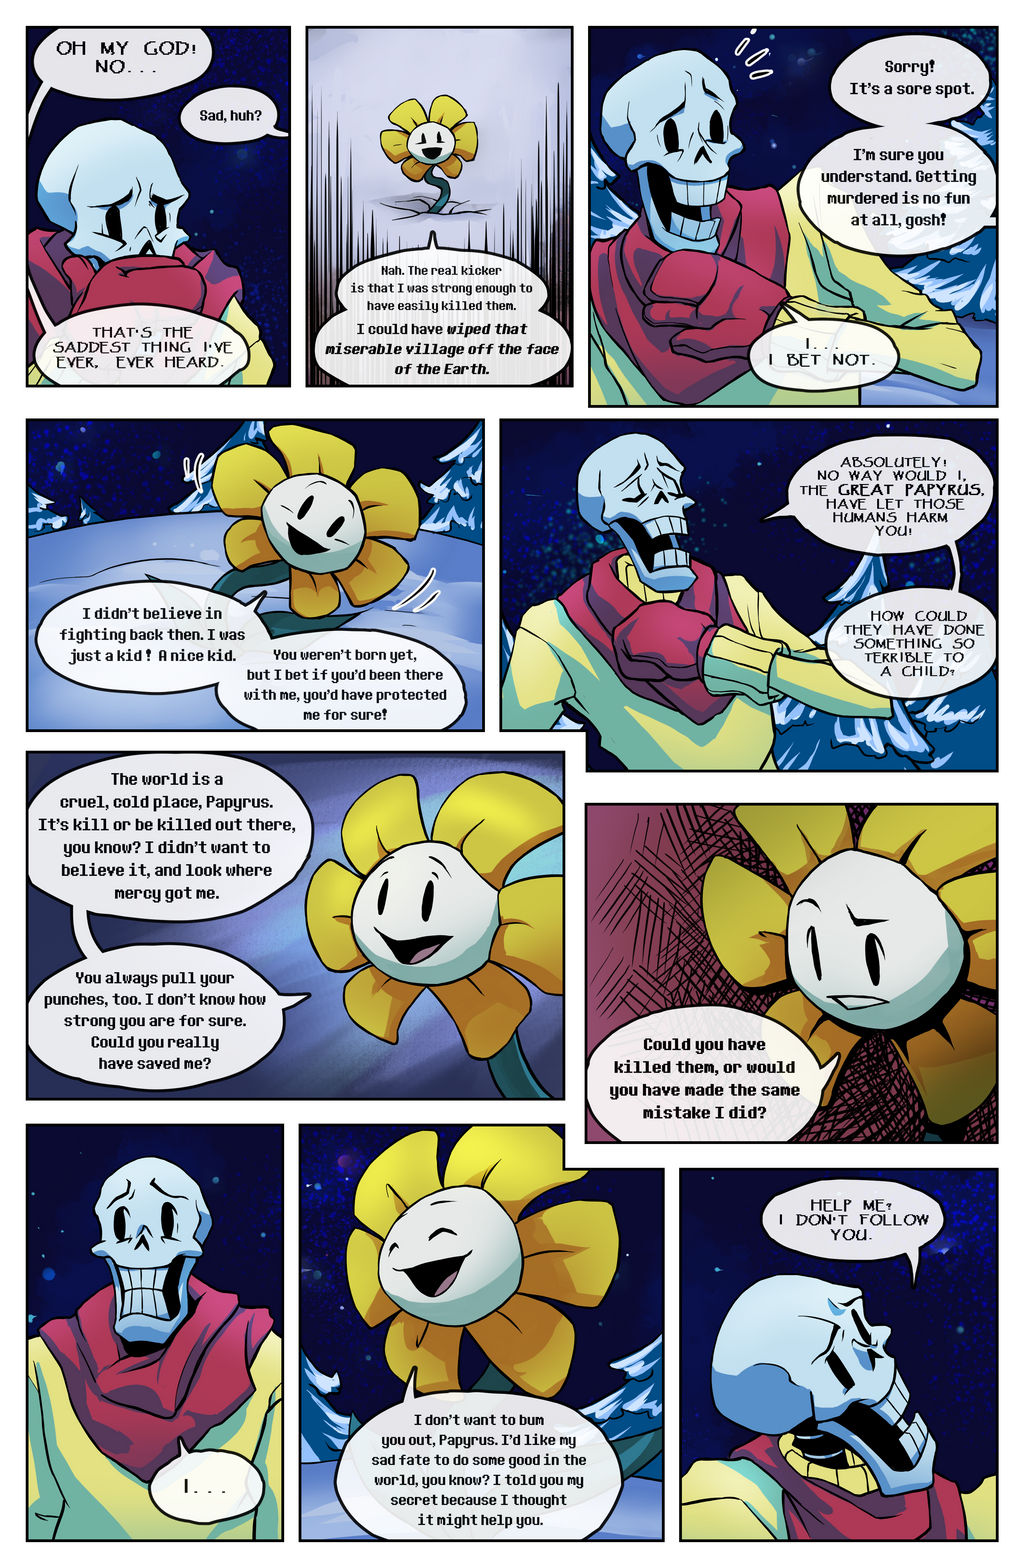 Flowey Is Not a Good Life Coach - Chap. 1, page 4